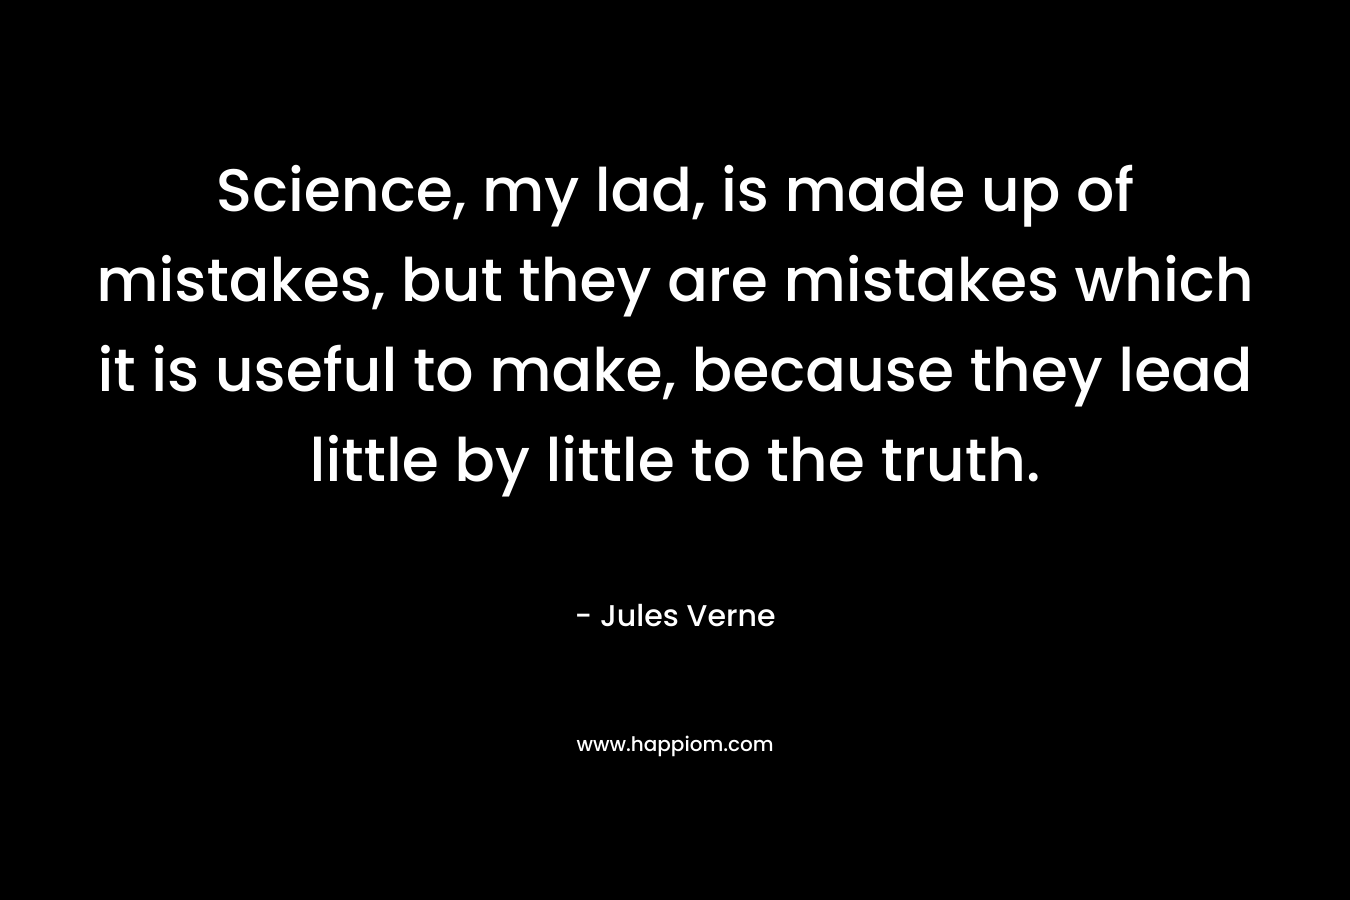 Science, my lad, is made up of mistakes, but they are mistakes which it is useful to make, because they lead little by little to the truth.